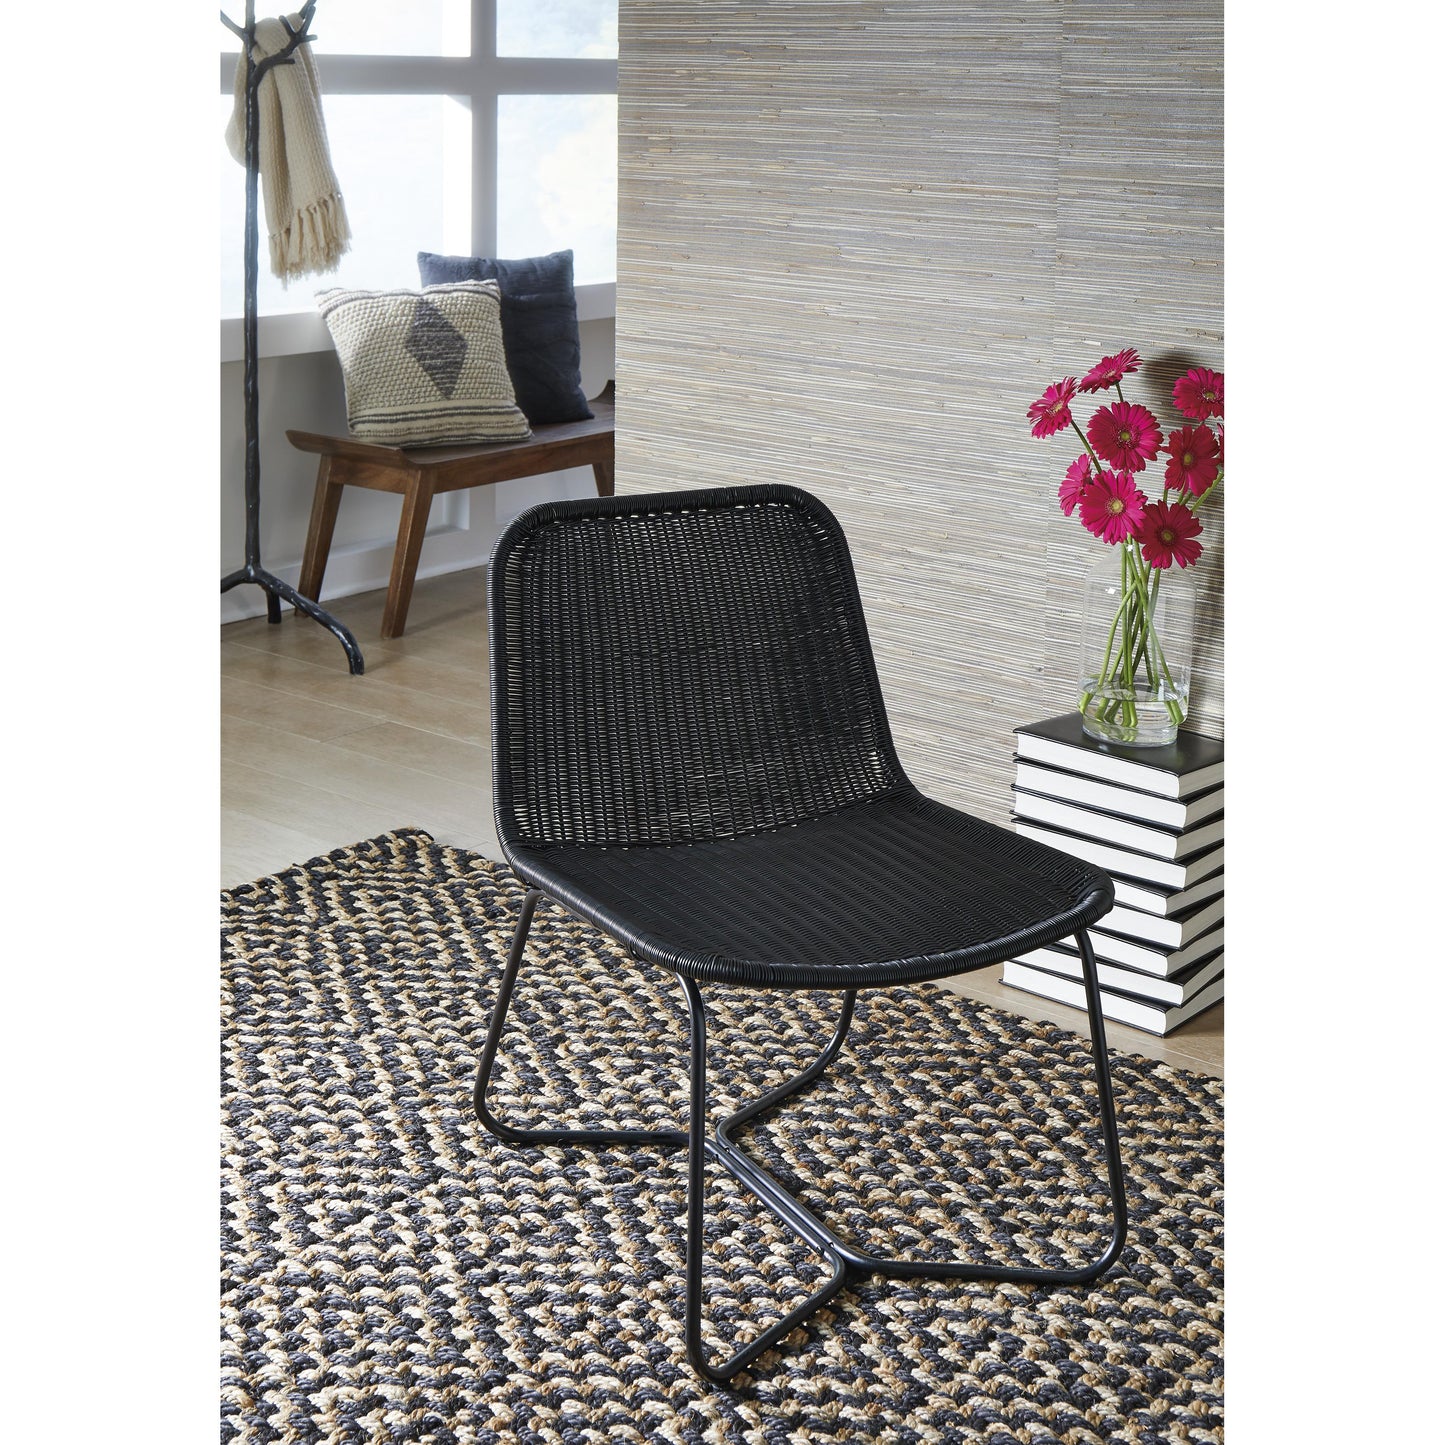 Signature Design by Ashley Daviston Stationary Metal Accent Chair A3000614 IMAGE 5